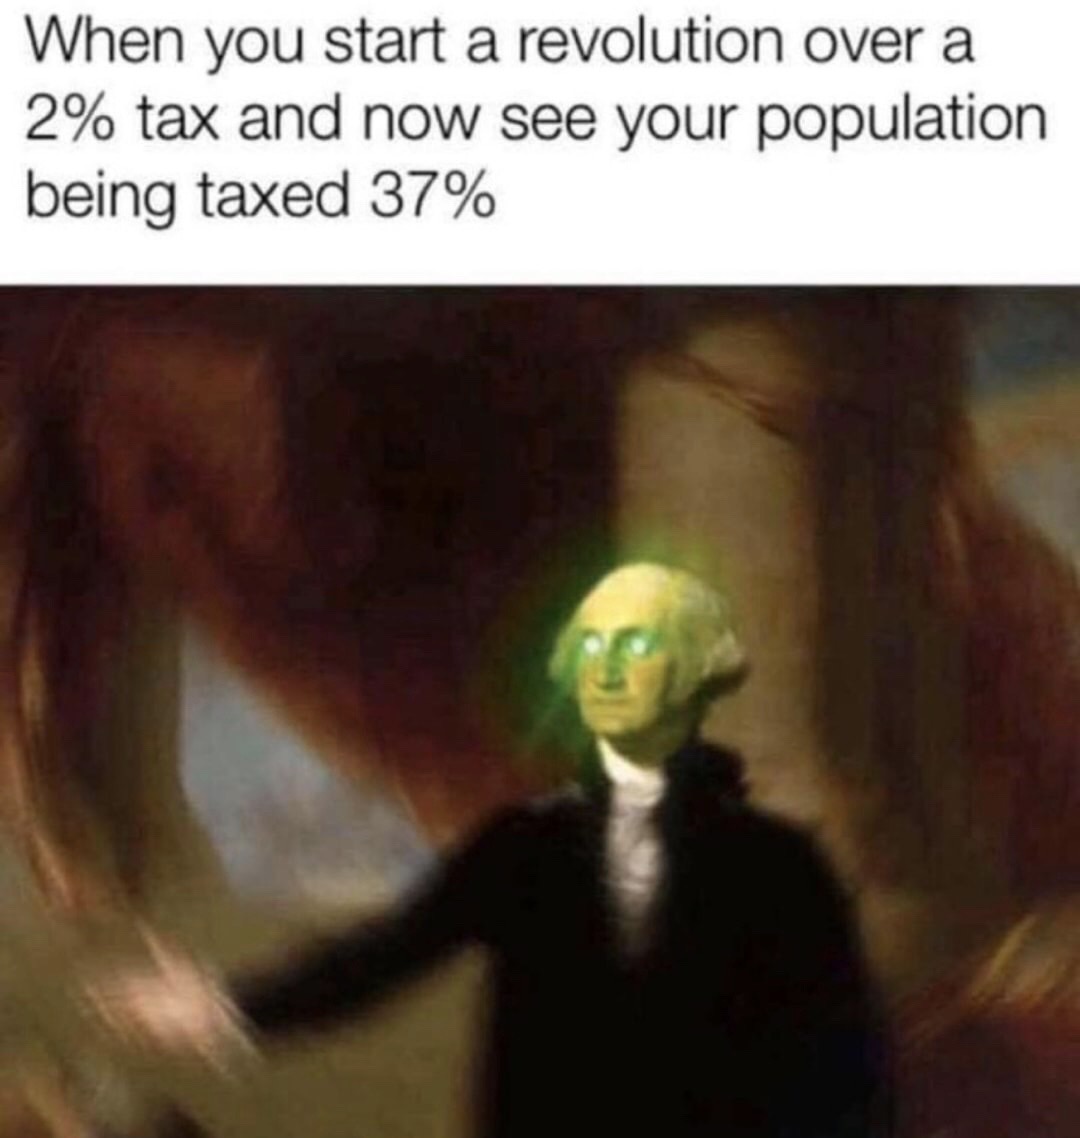 Humour - When you start a revolution over a 2% tax and now see your population being taxed 37%